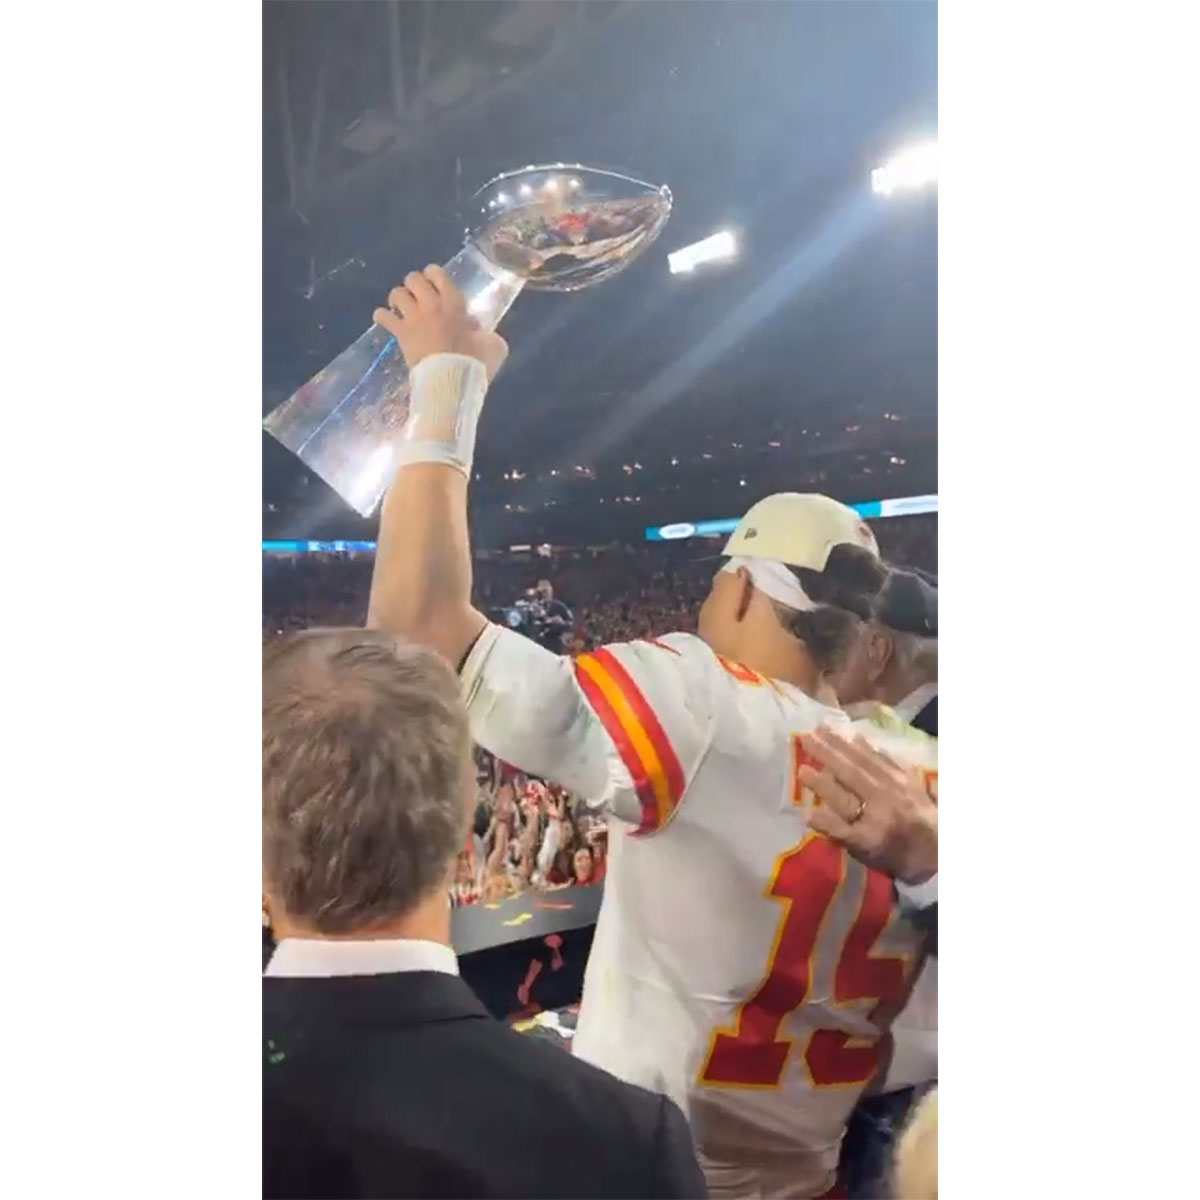 Brittany Mahomes Yells 'He Did It!' After Patrick's Super Bowl Win